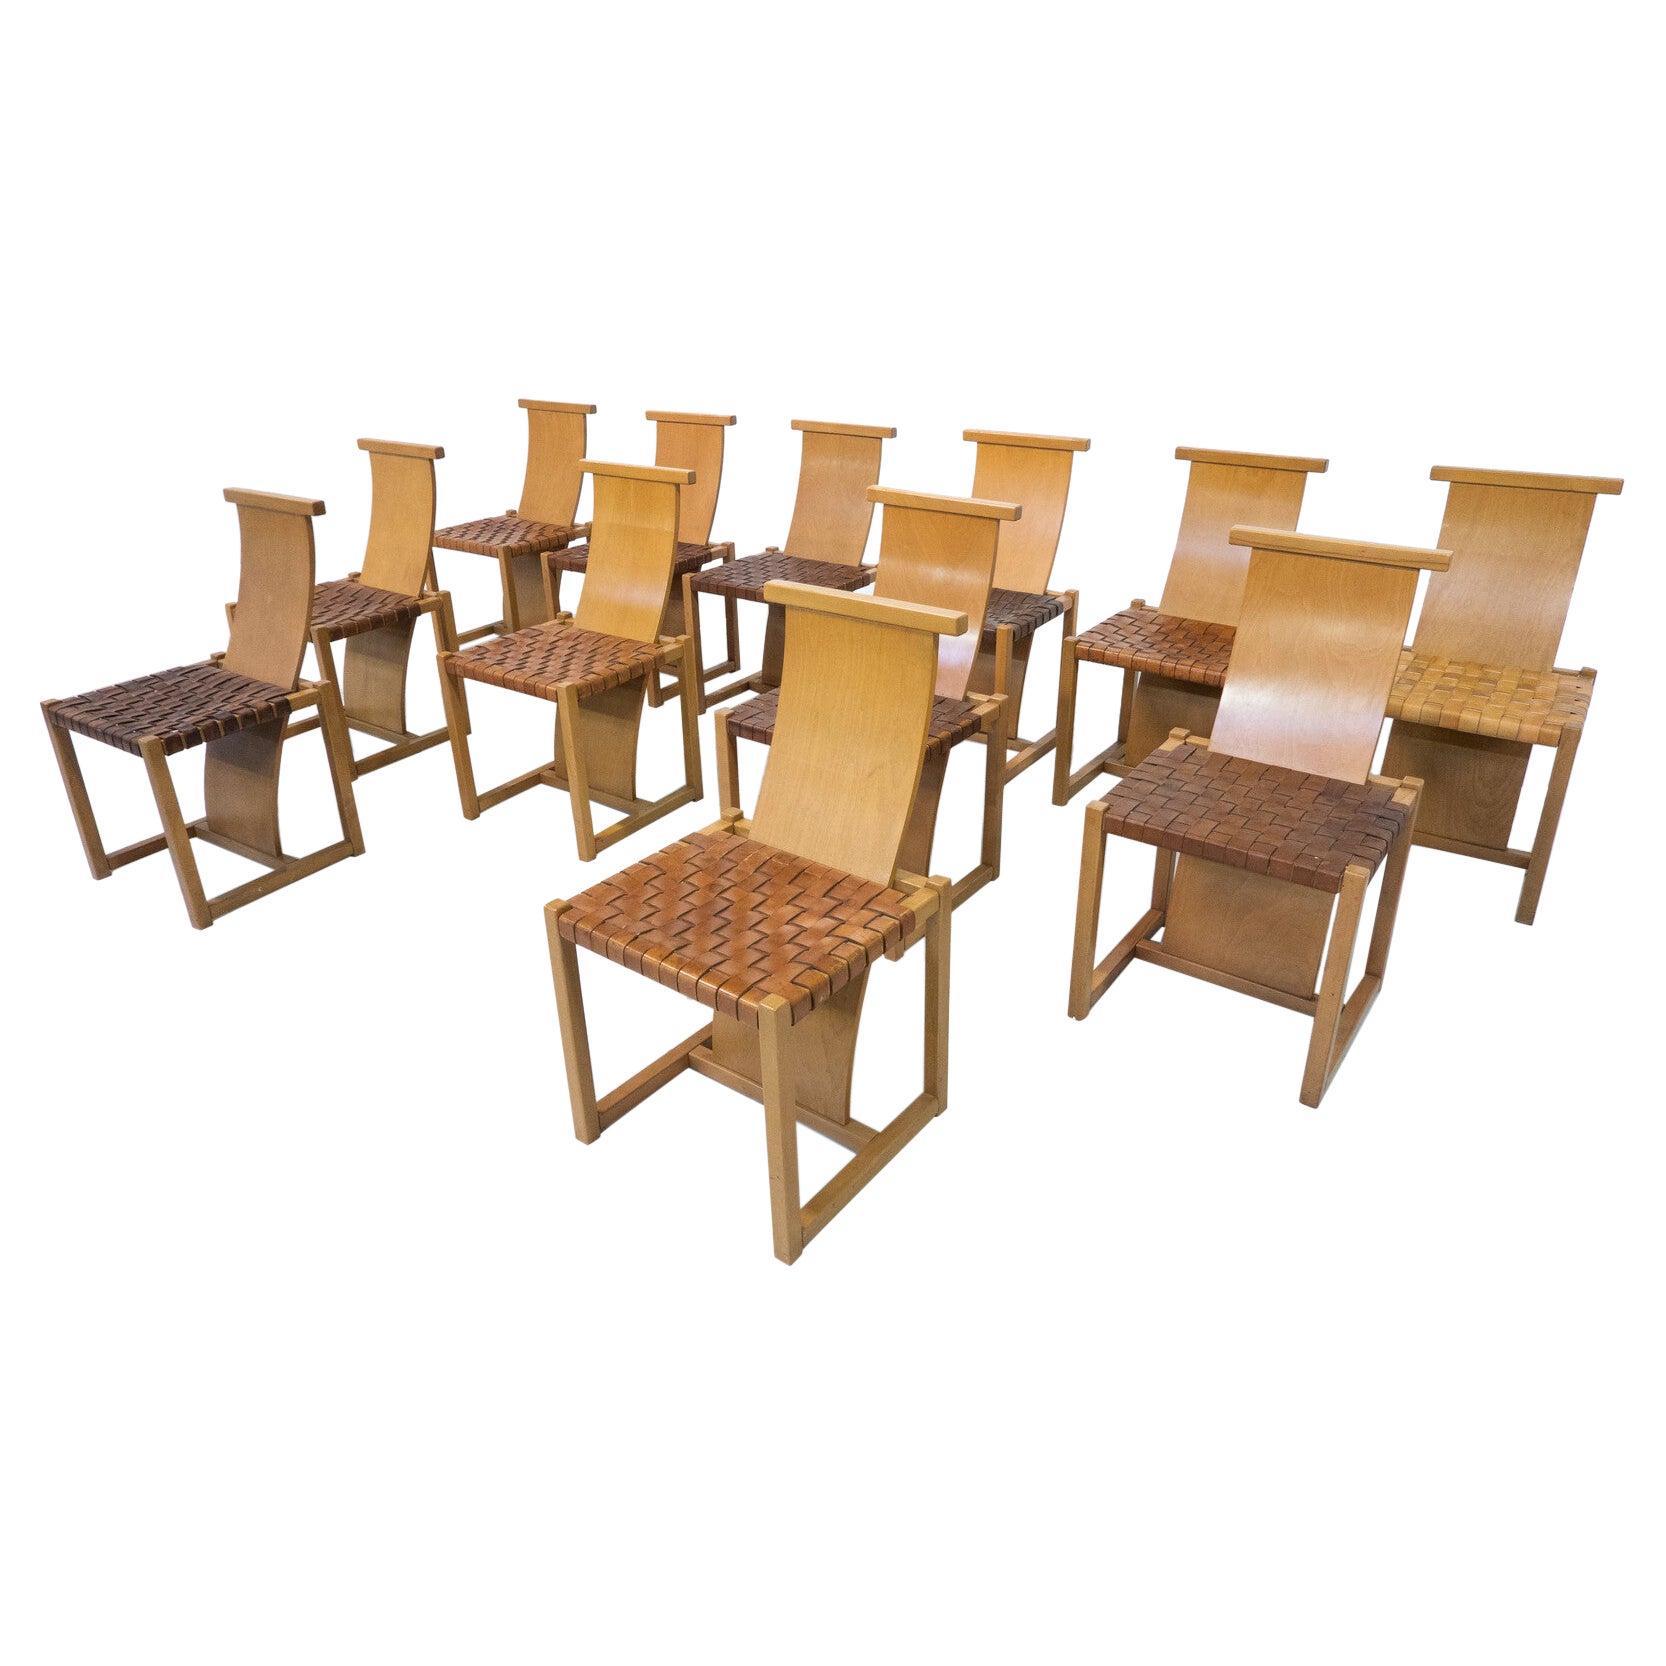 Mid-Century Modern Set of 12 Wood and Leather Chairs, Italy, 1950s For Sale